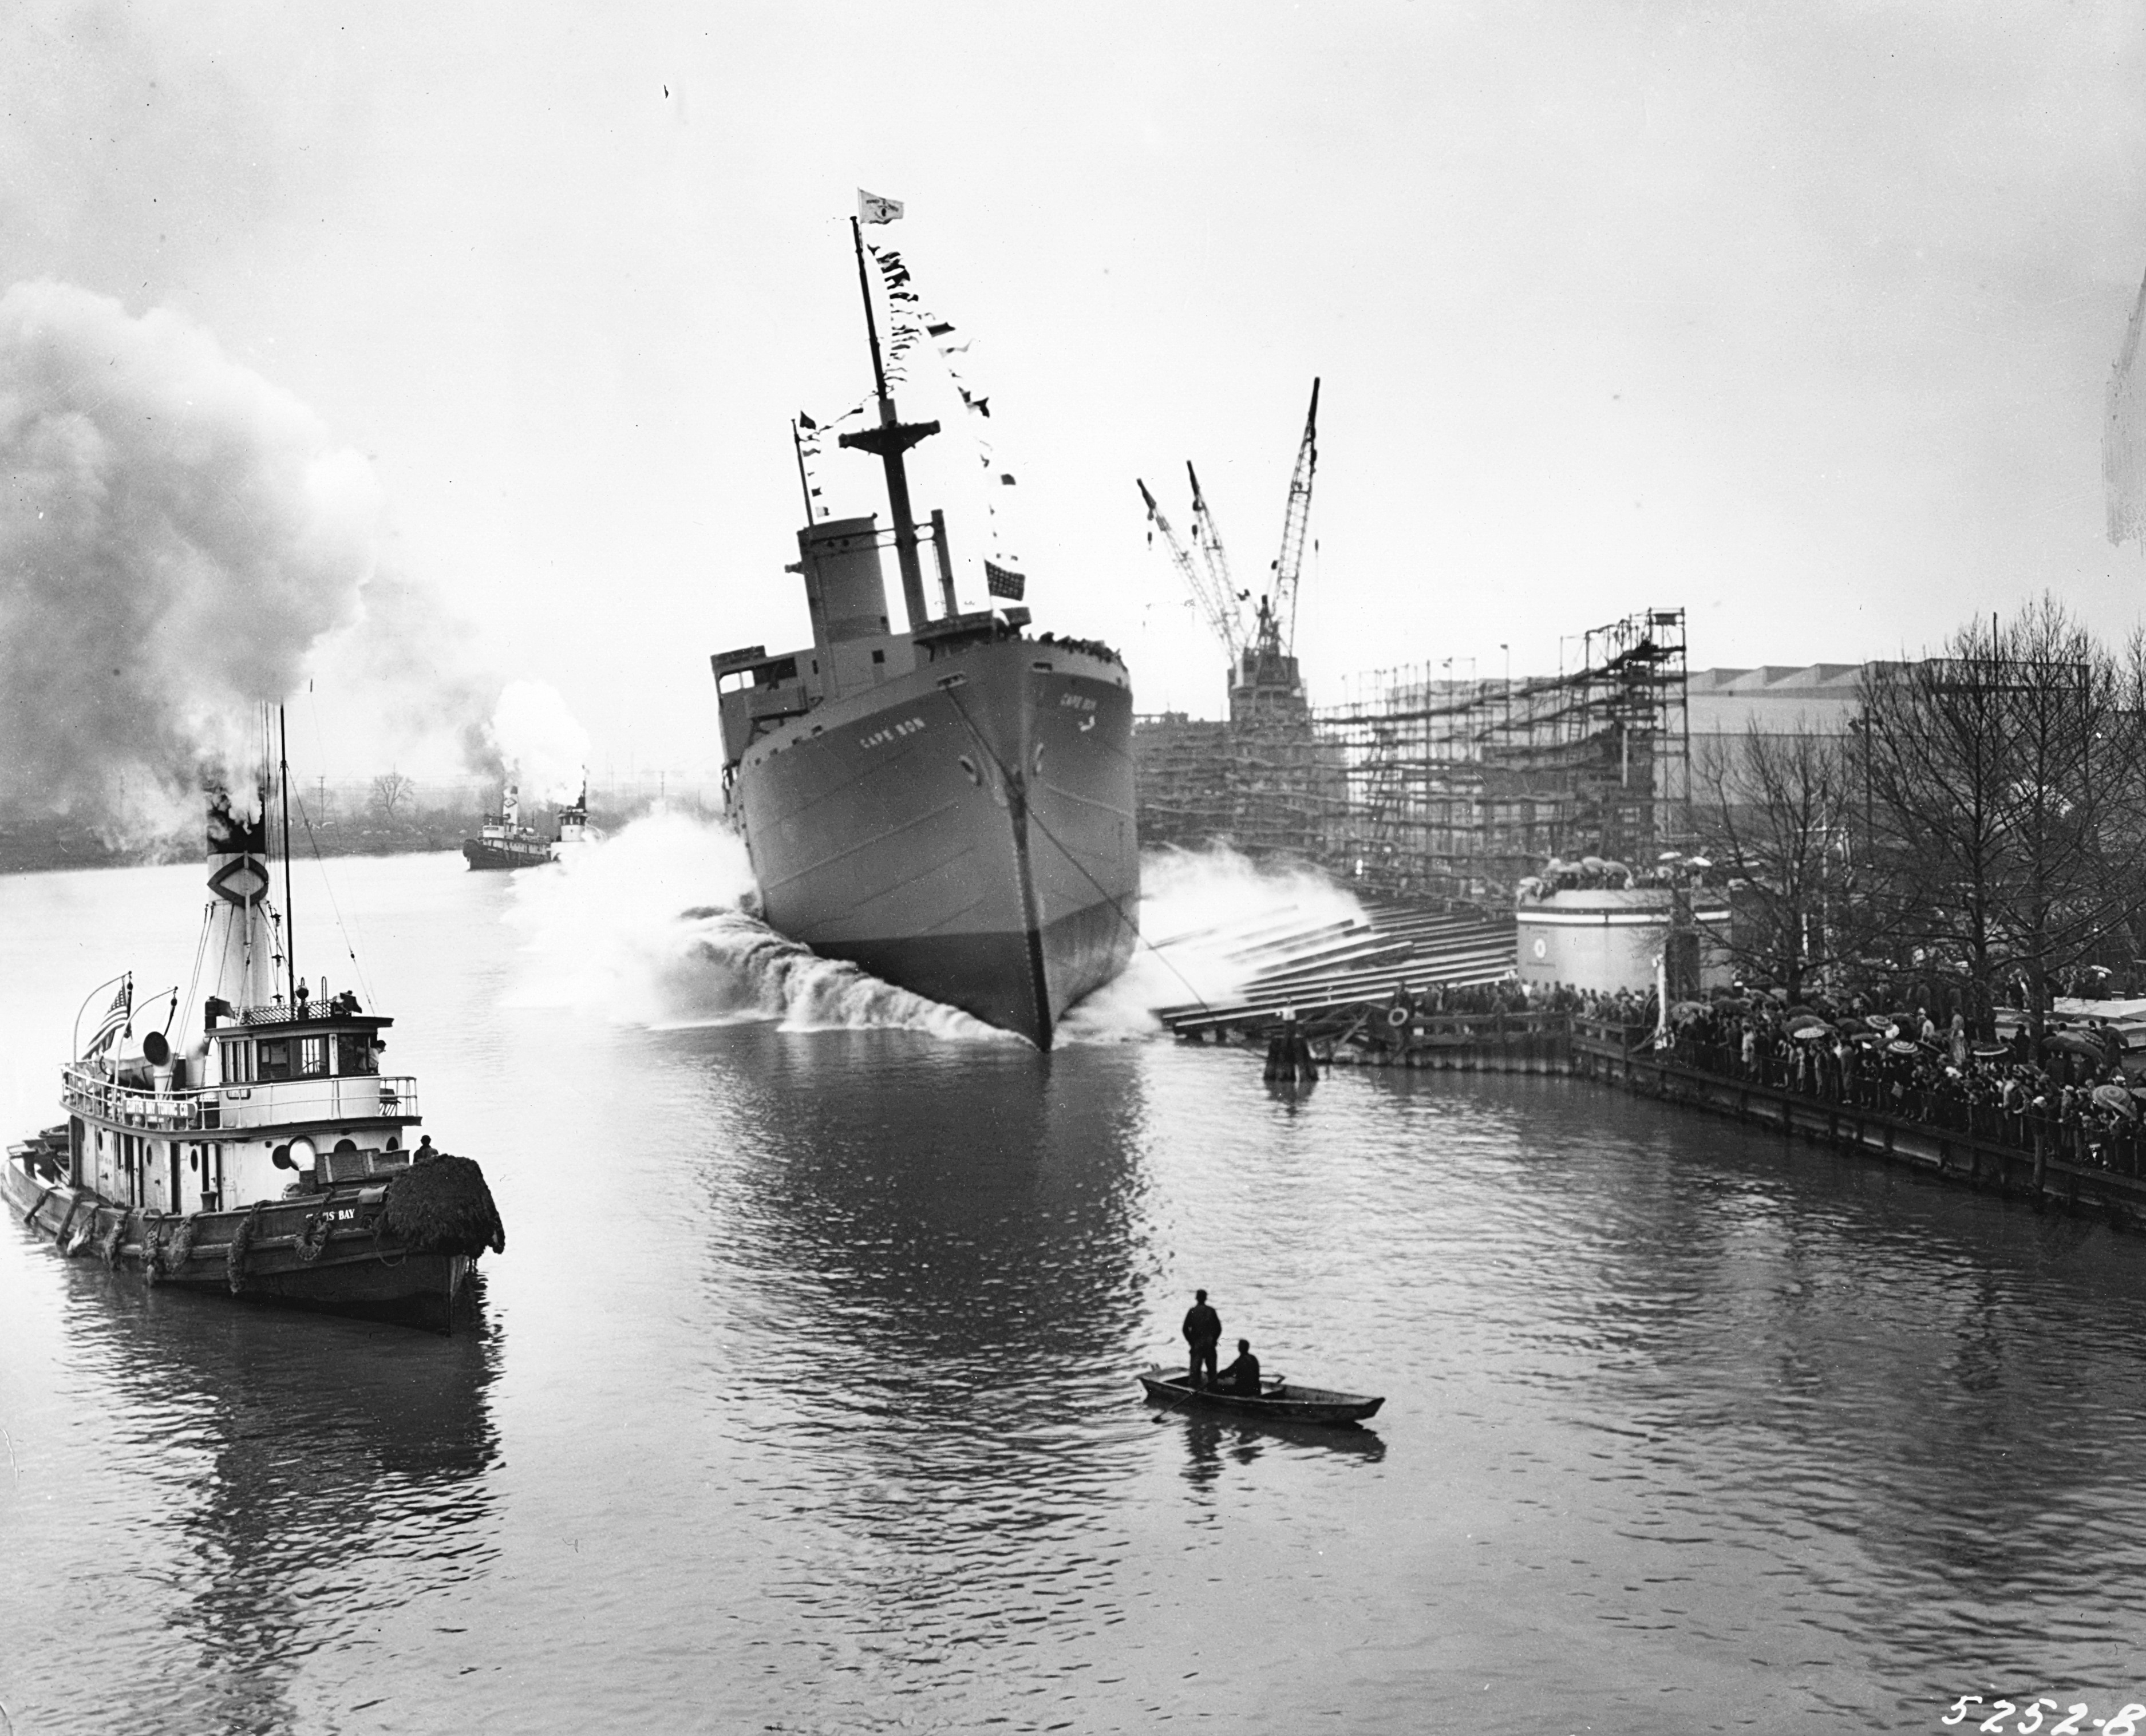 Black and white image of a large freighter ship being dropped into a busy river with many ships.